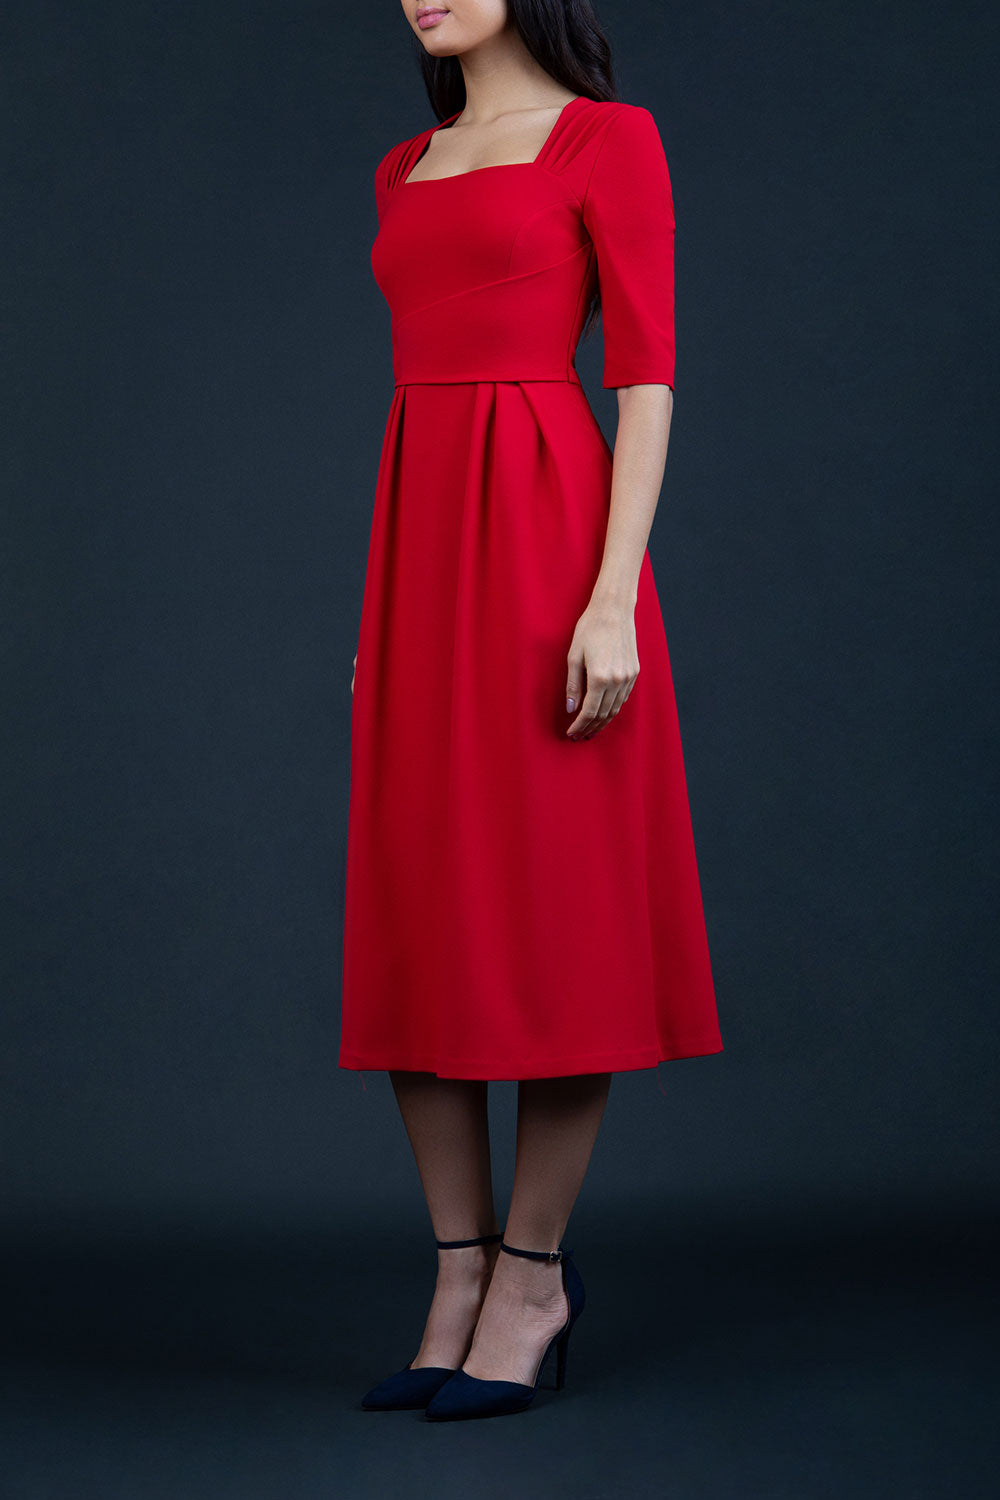 model is wearing diva catwalk mimi maxi sleeved dress with square neckline in scarlet red front